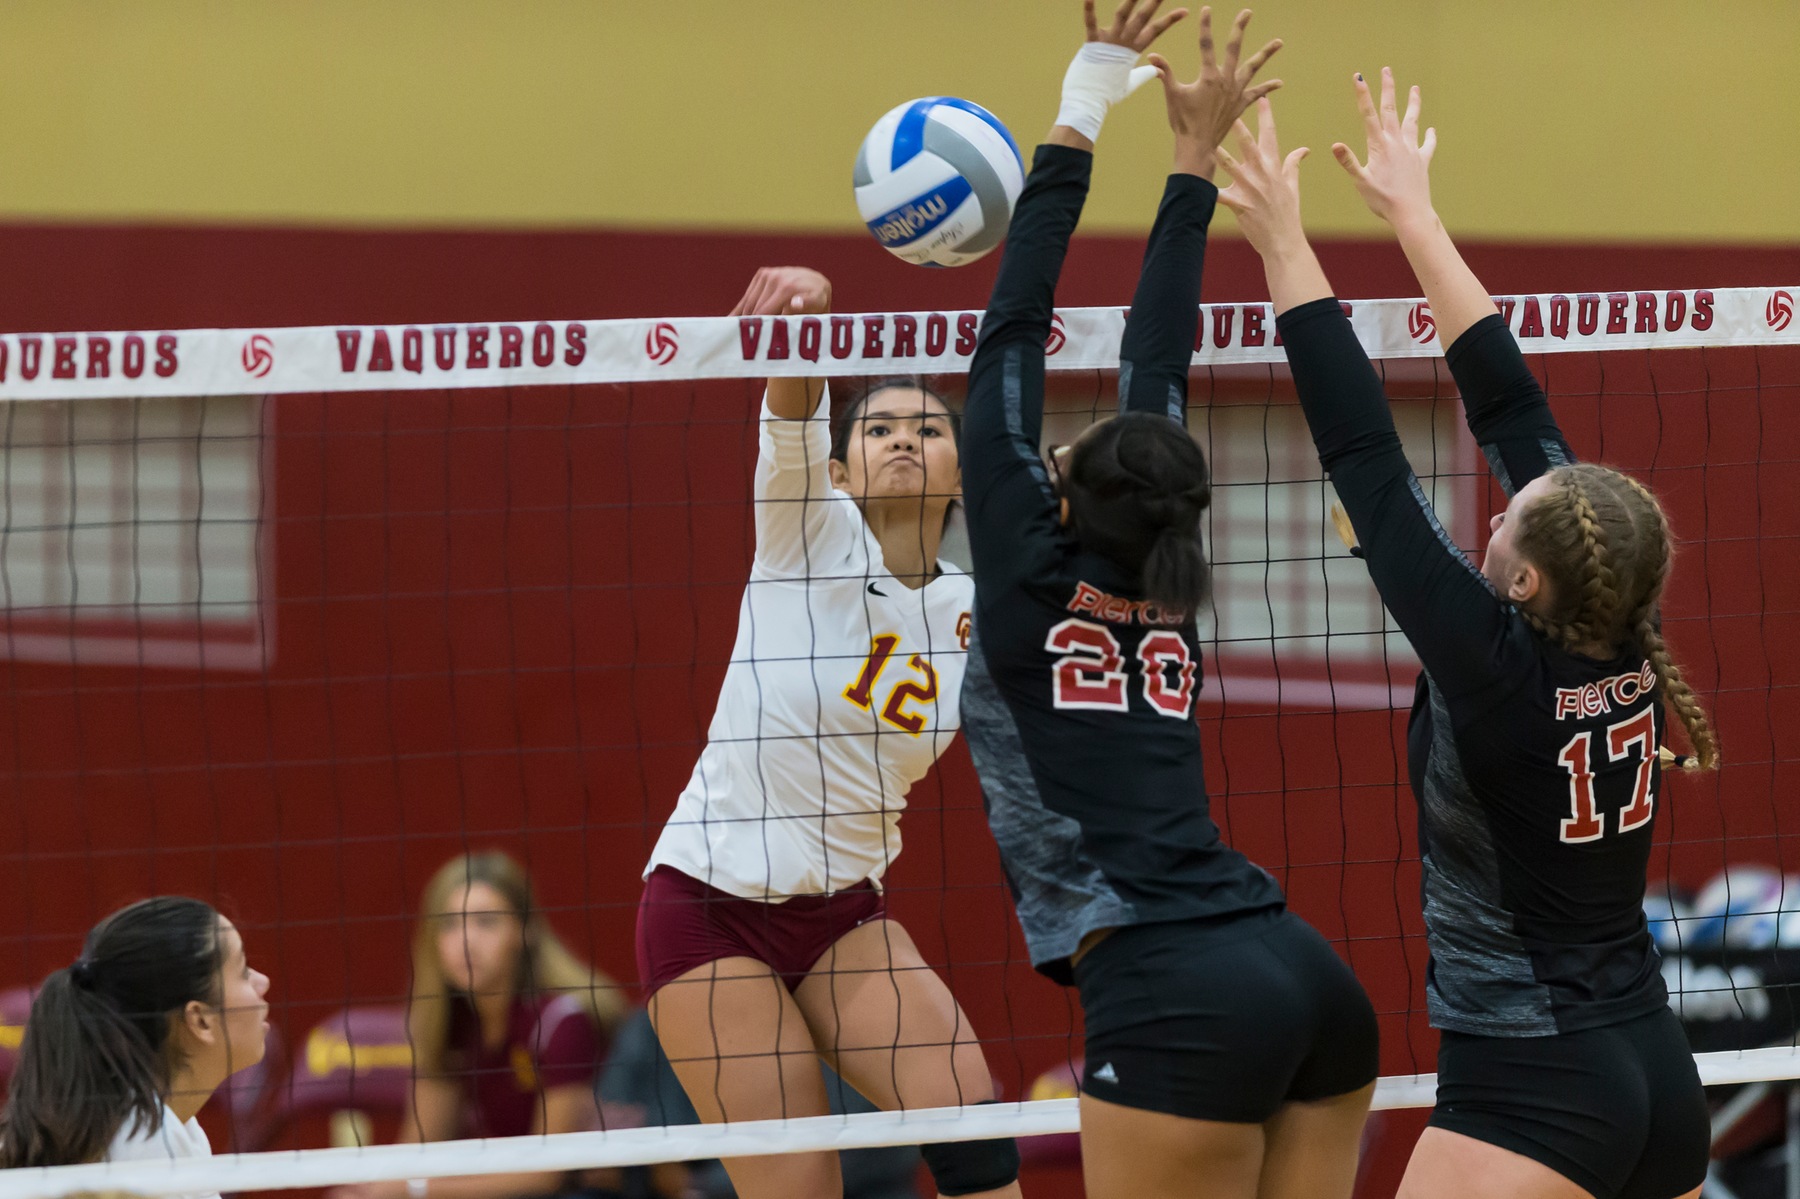 Glendale Women's Volleyball fell to L.A. Pierce College 3-0 last Friday at home, 25-19, 25-16 and 25-13.